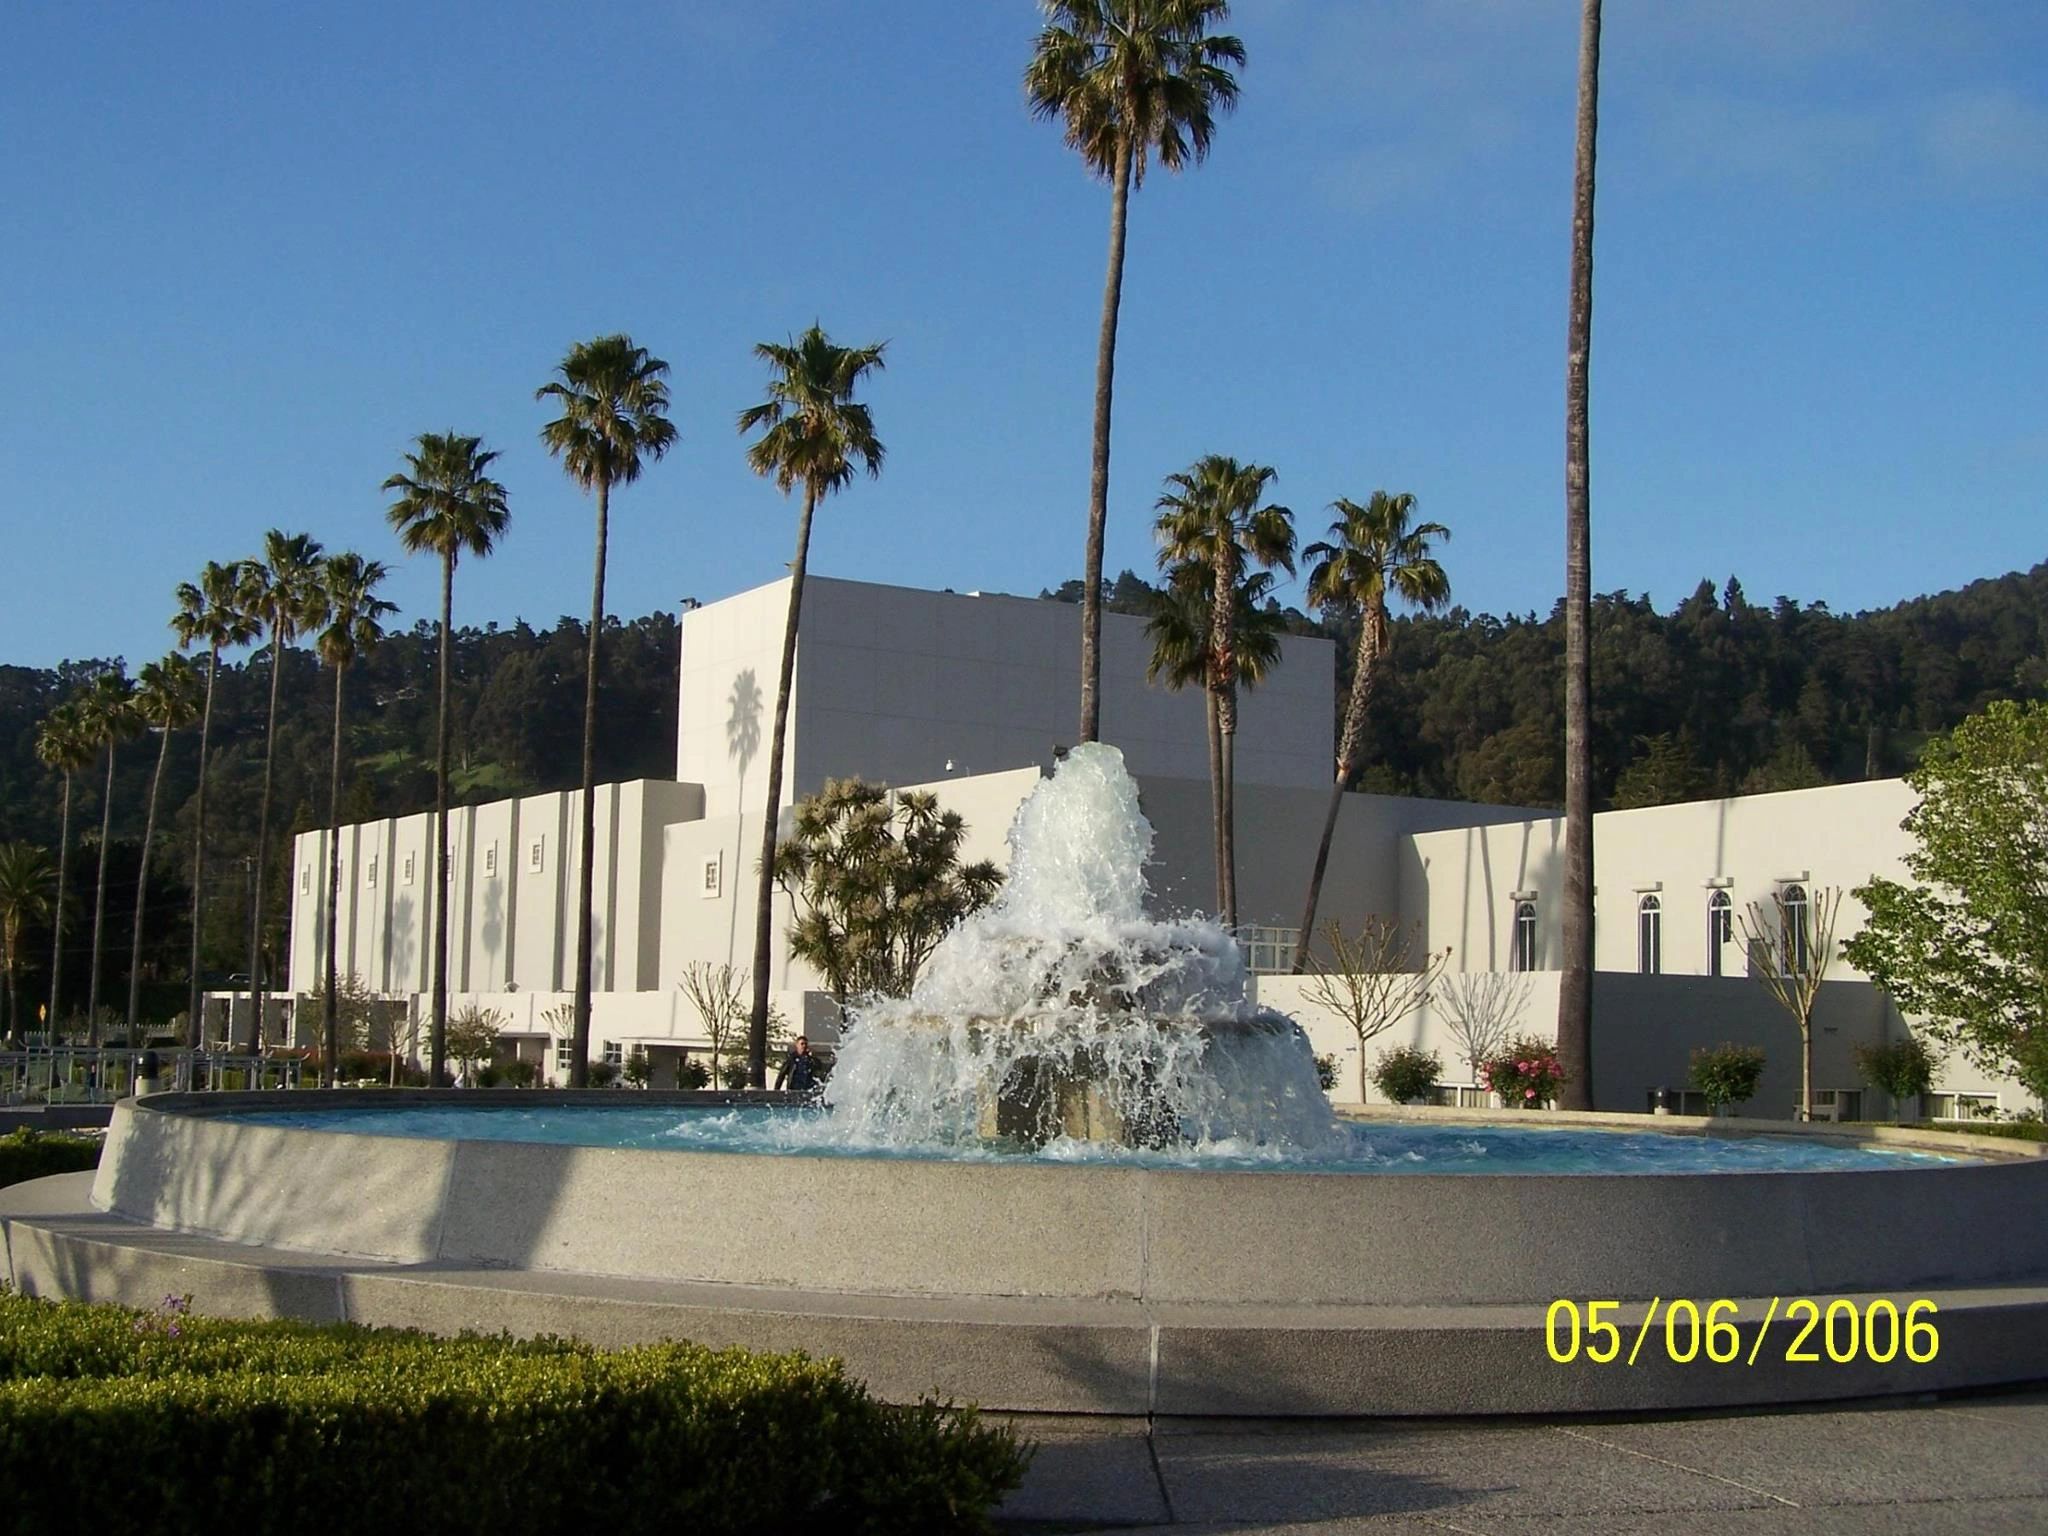 2006 Oakland Temple Hill Auditorium, Chapel and Interstake Center. 